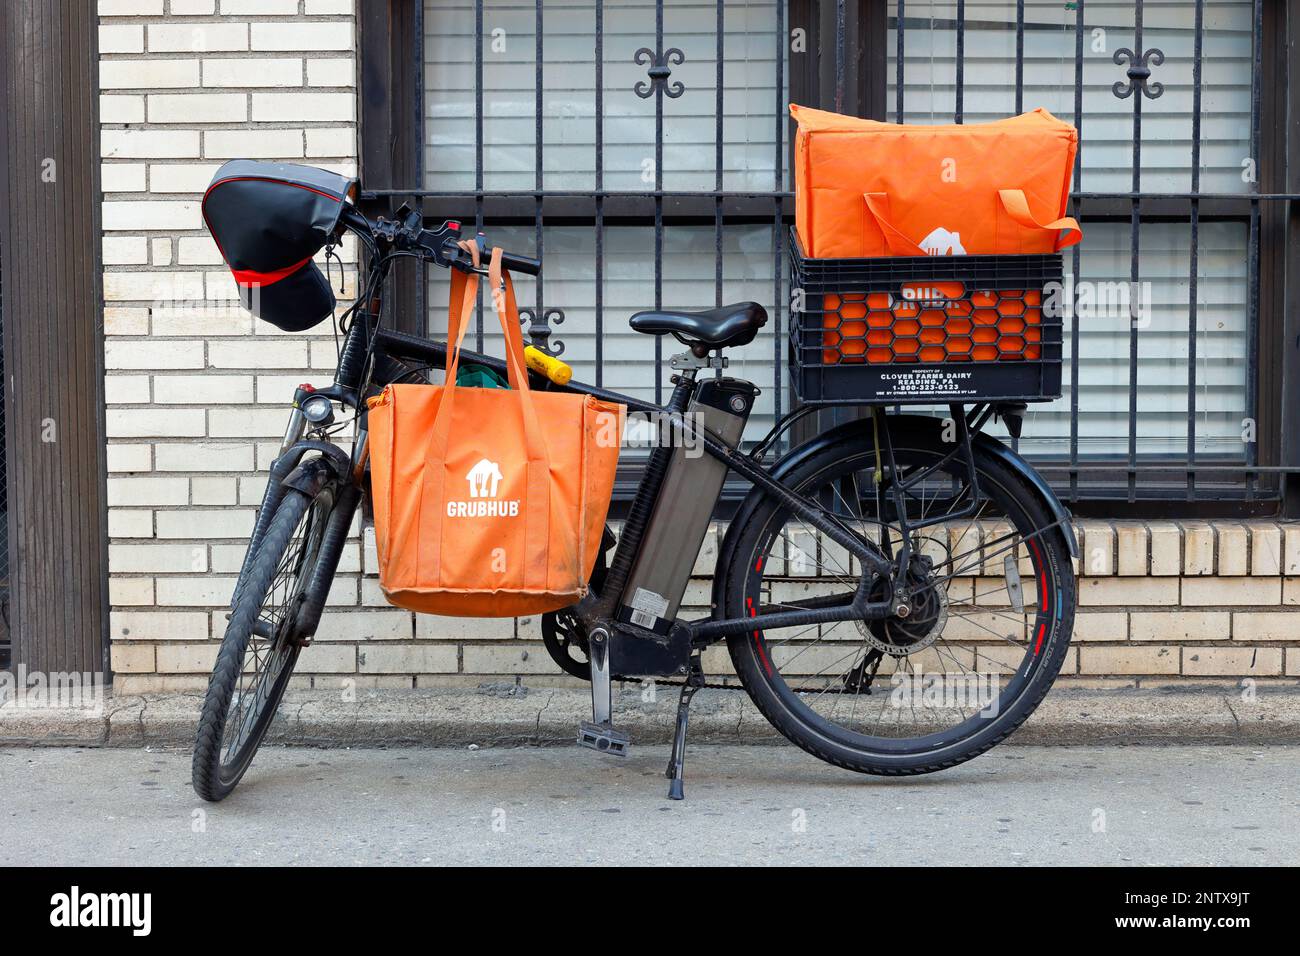 An e bike equipped with electric battery and Grubhub food delivery thermal bags, outside a building in New York City. Stock Photo